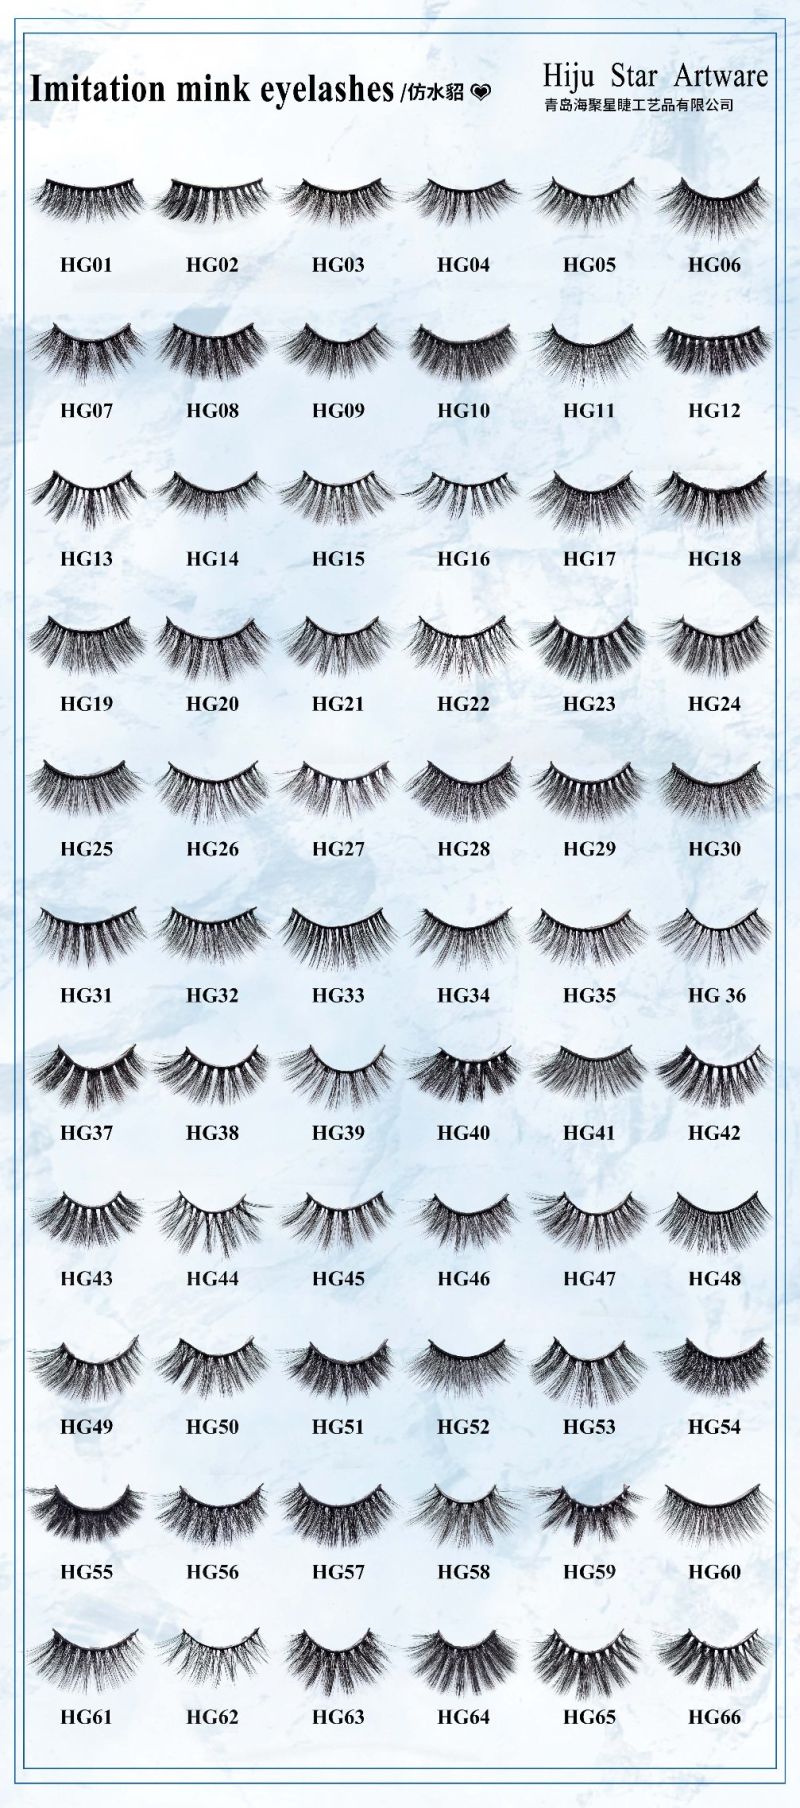 3D Faux Mink Eyelashes with 10mm to 30mm, a Variety of Models, Synthetic Eyelashes